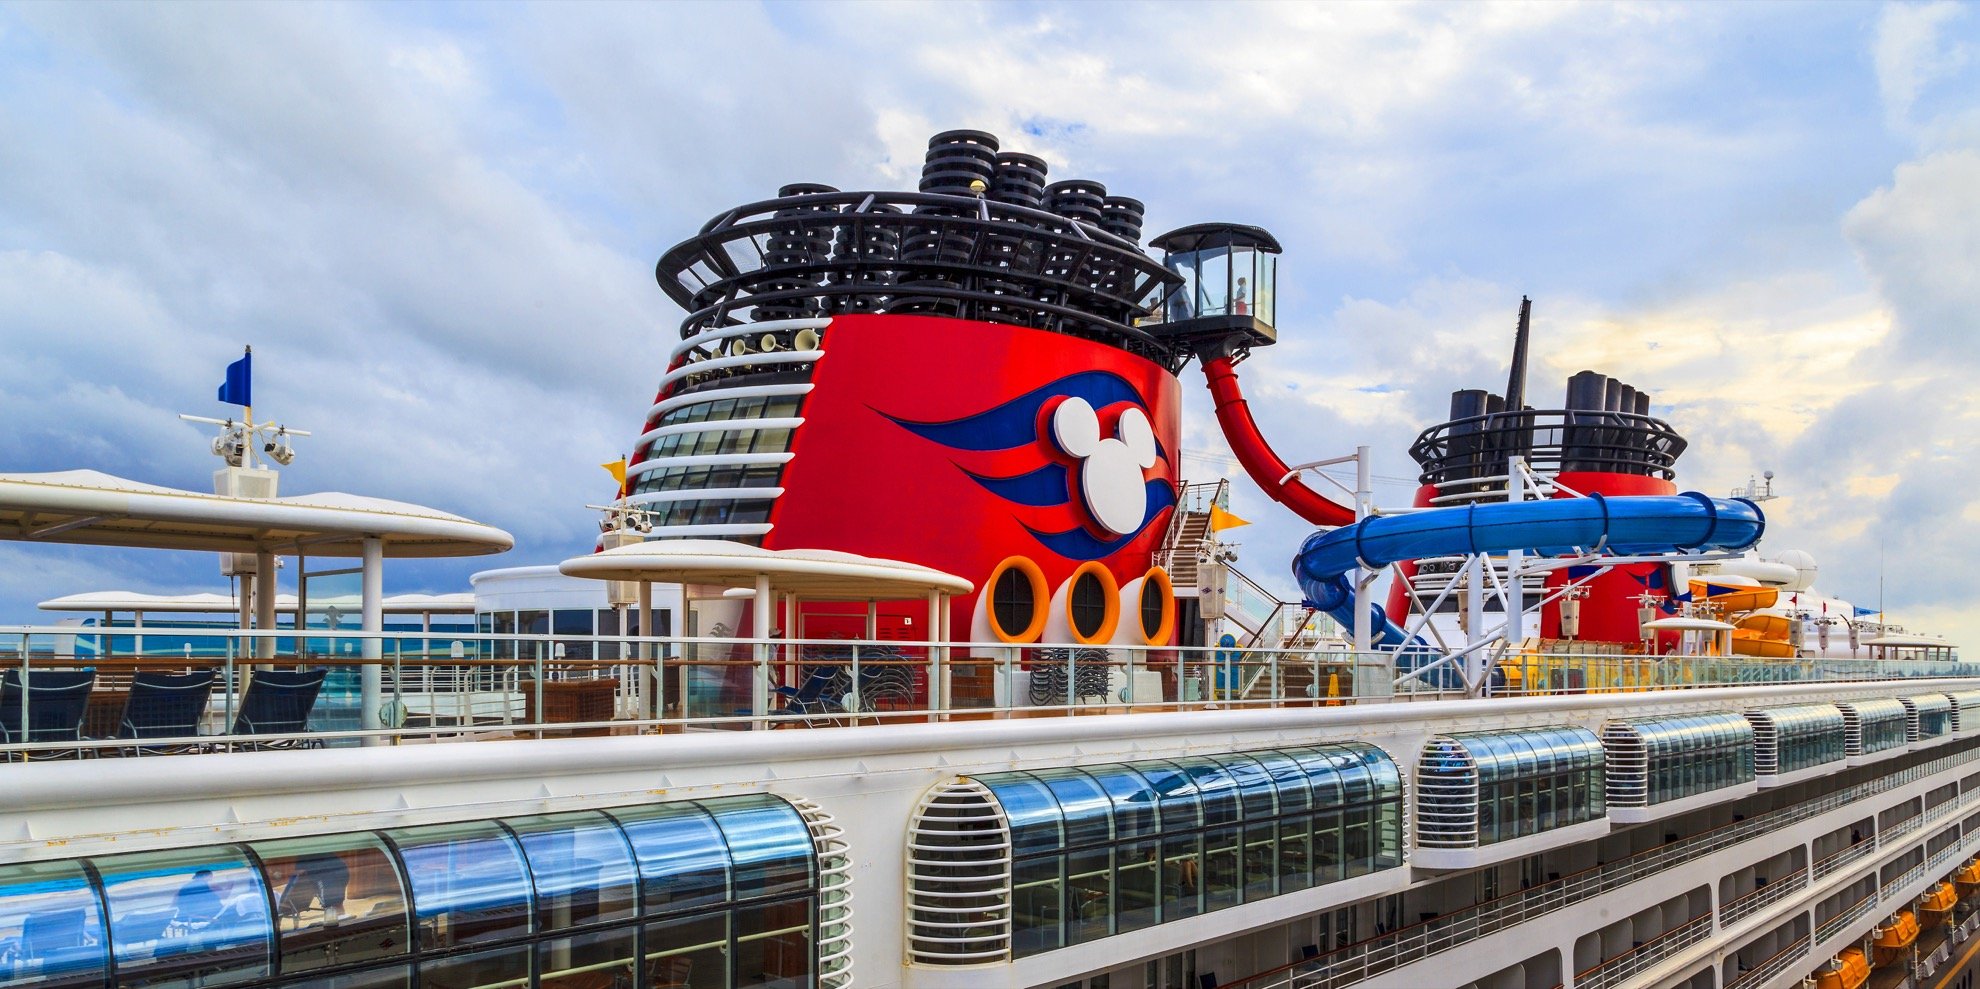 Disney Cruise Line gets approval to start test cruises | Royal Caribbean Blog